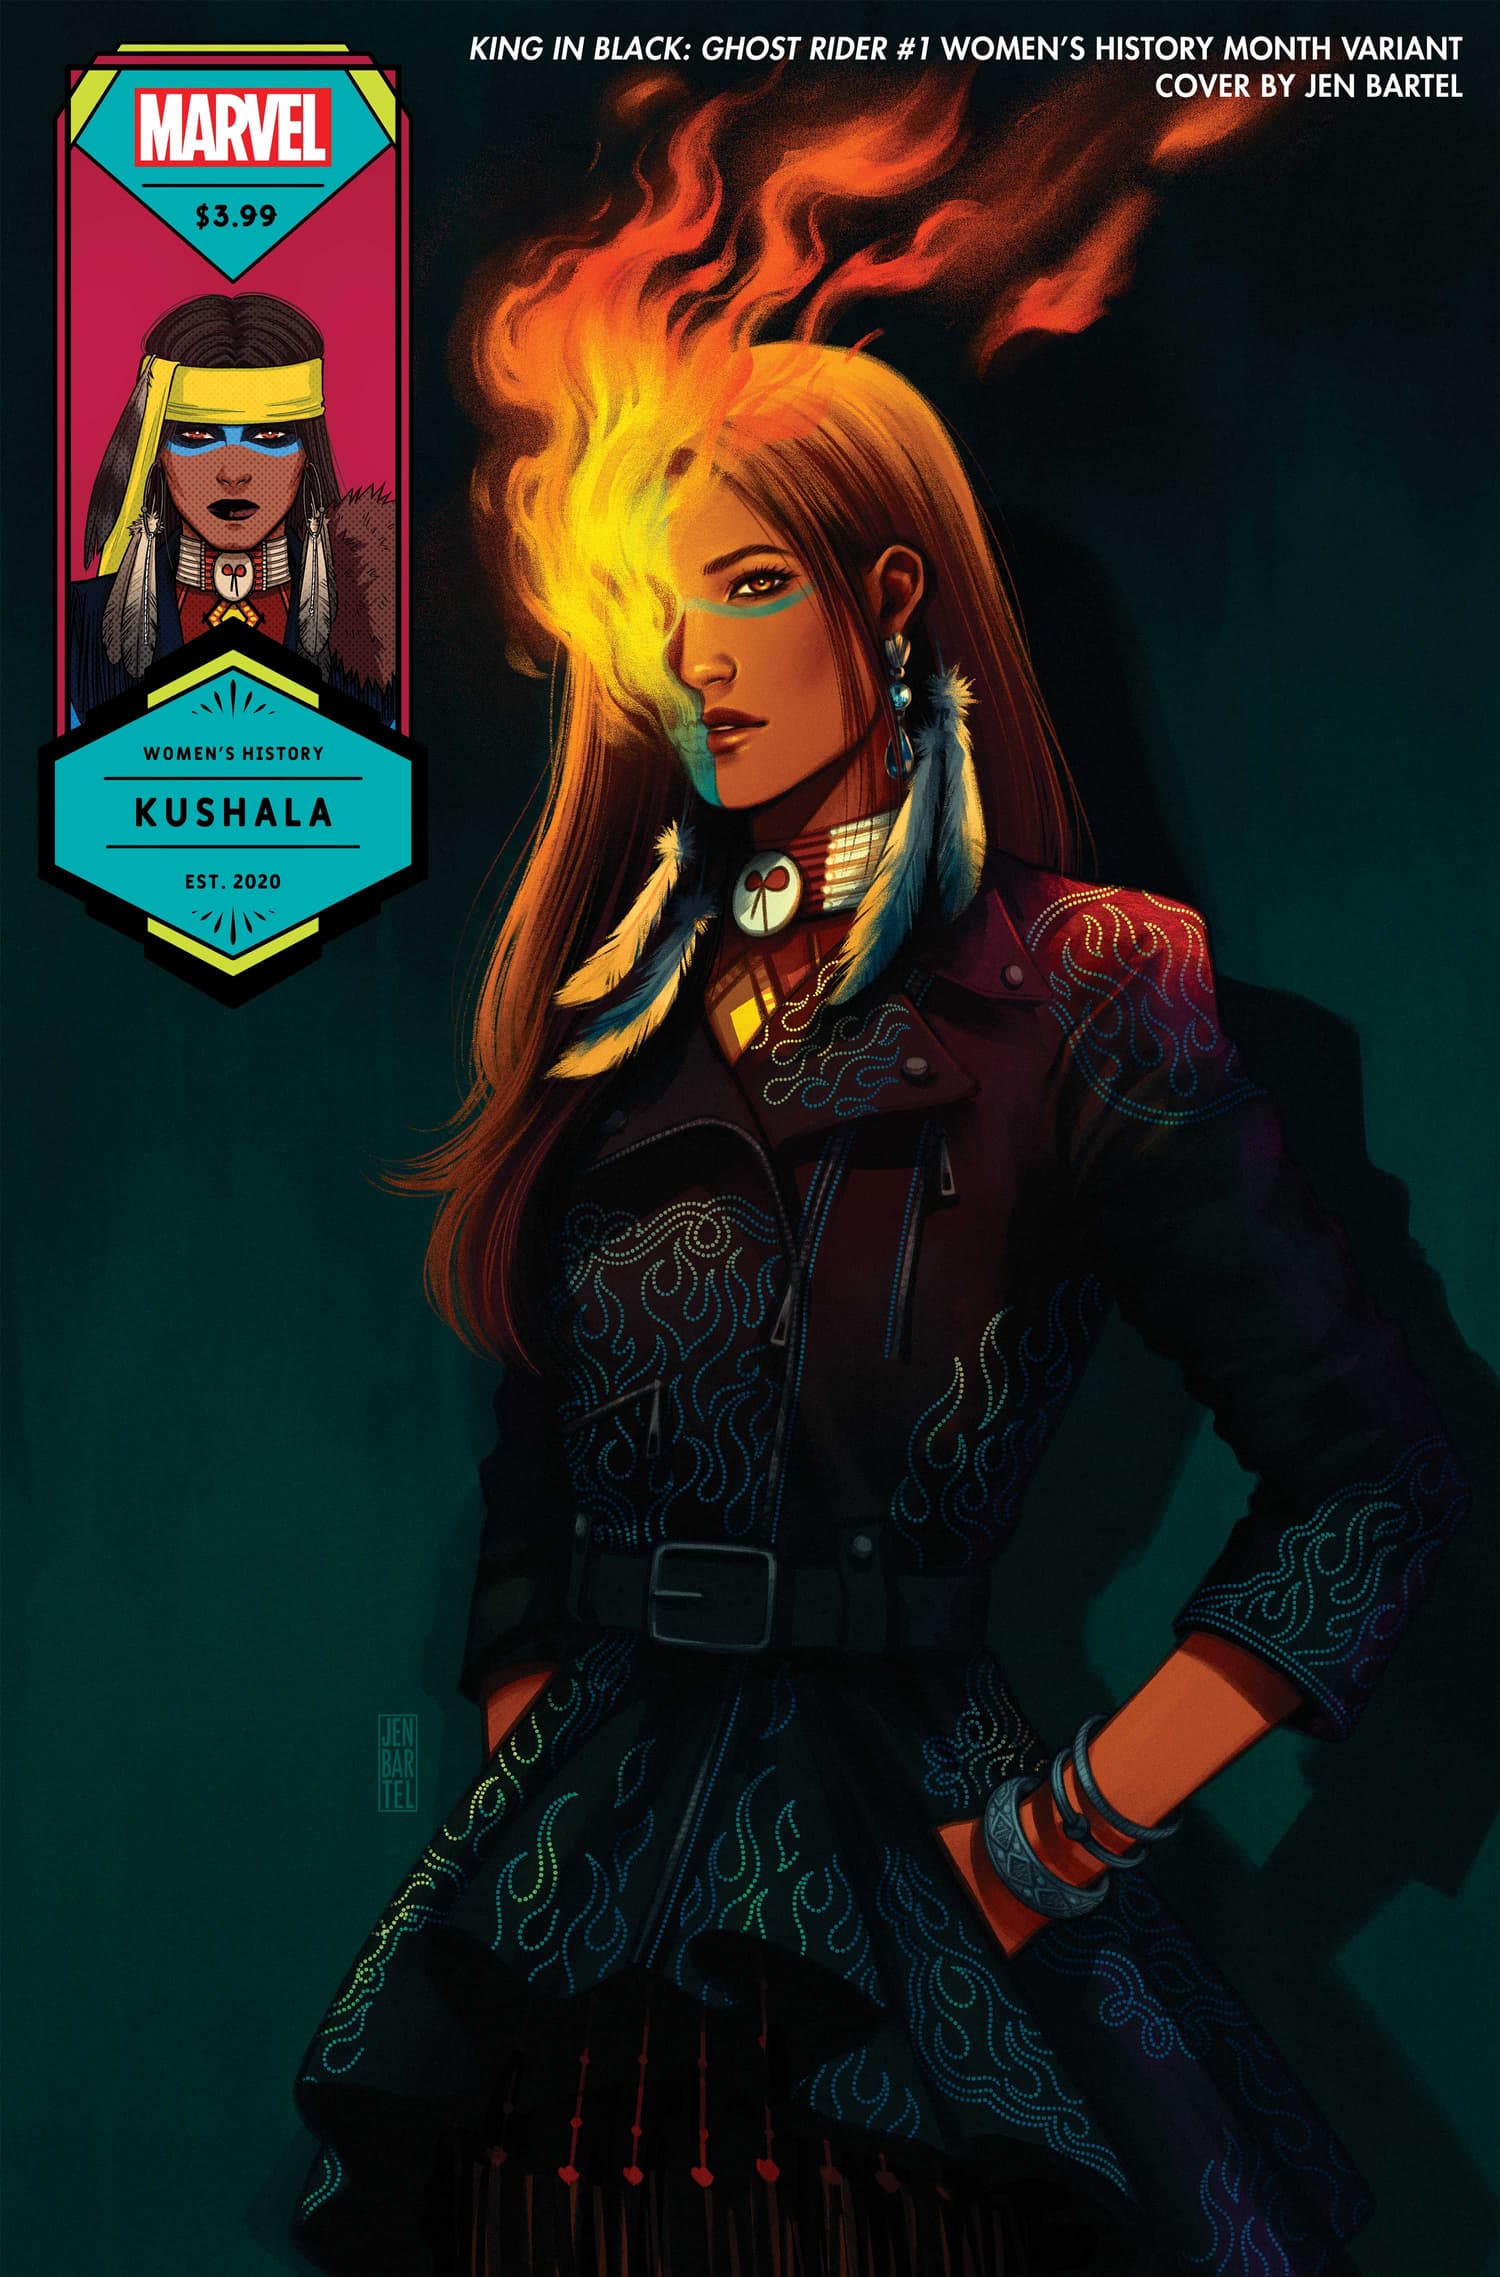 KING IN BLACK: GHOST RIDER #1 WOMEN’S HISTORY MONTH VARIANT COVER by JEN BARTEL